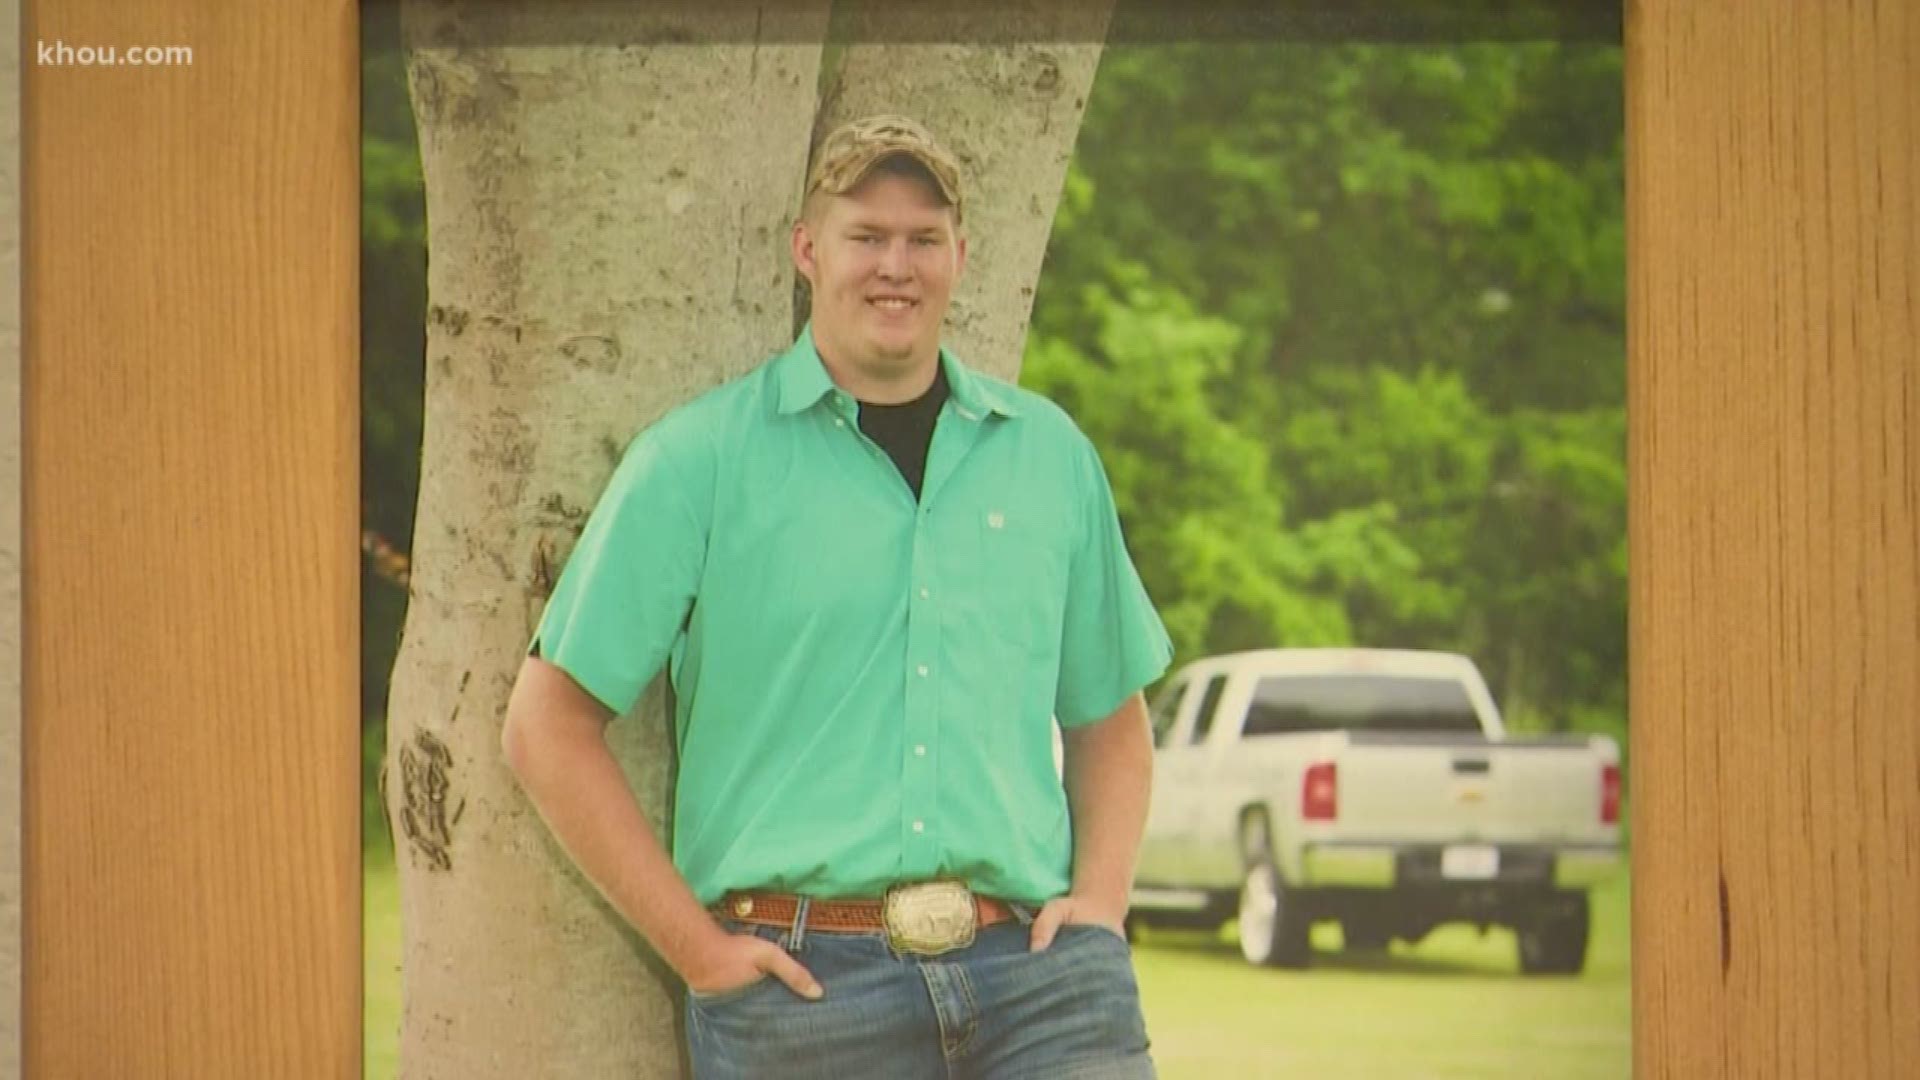 A grieving father is helping change state law to honor his late son Cody Stephens.